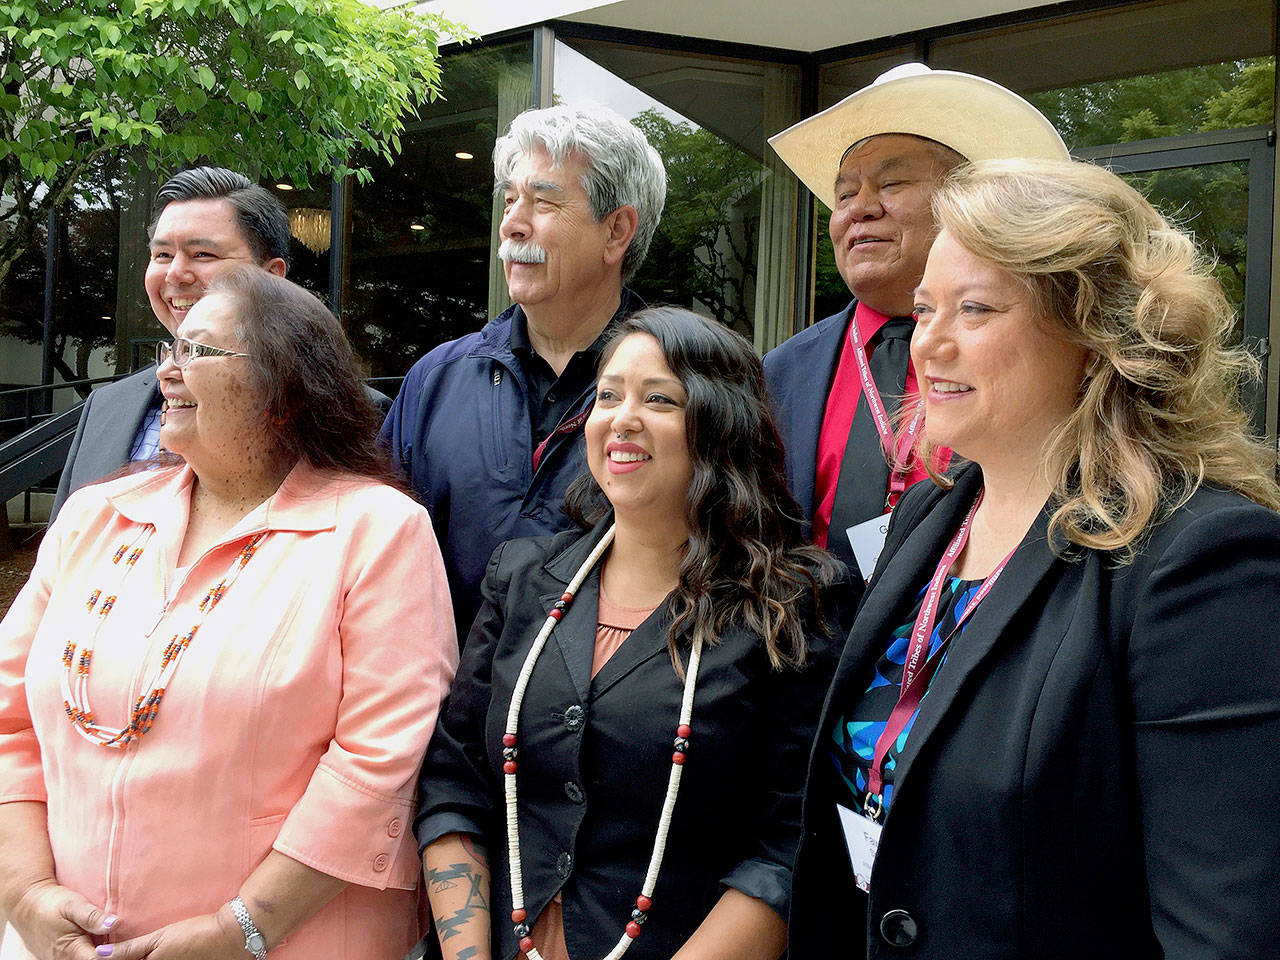 Tribal leaders from the Pacific Northwest pose for a picture during a meeting of the Members of the Affiliated Tribes of Northwest Indians in Portland on Thursday. Front row, from left: Cheryl Kennedy, vice chairwoman of the Confederated Tribes of the Grand Ronde; Carina Miller, councilwoman with the Confederated Tribes of Warm Springs; and Fawn Sharp, president of the Affiliated Tribes of Northwest Indians. Back row, from left: Timothy Ballew, member of the Lummi Nation; Mel Sheldon, councilman with the Tulalip Tribes; and Gary Burke, chairman of the board of trustees for the Confederated Tribes of the Umatilla Indian Reservation. (AP Photo/Gillian Flaccus)